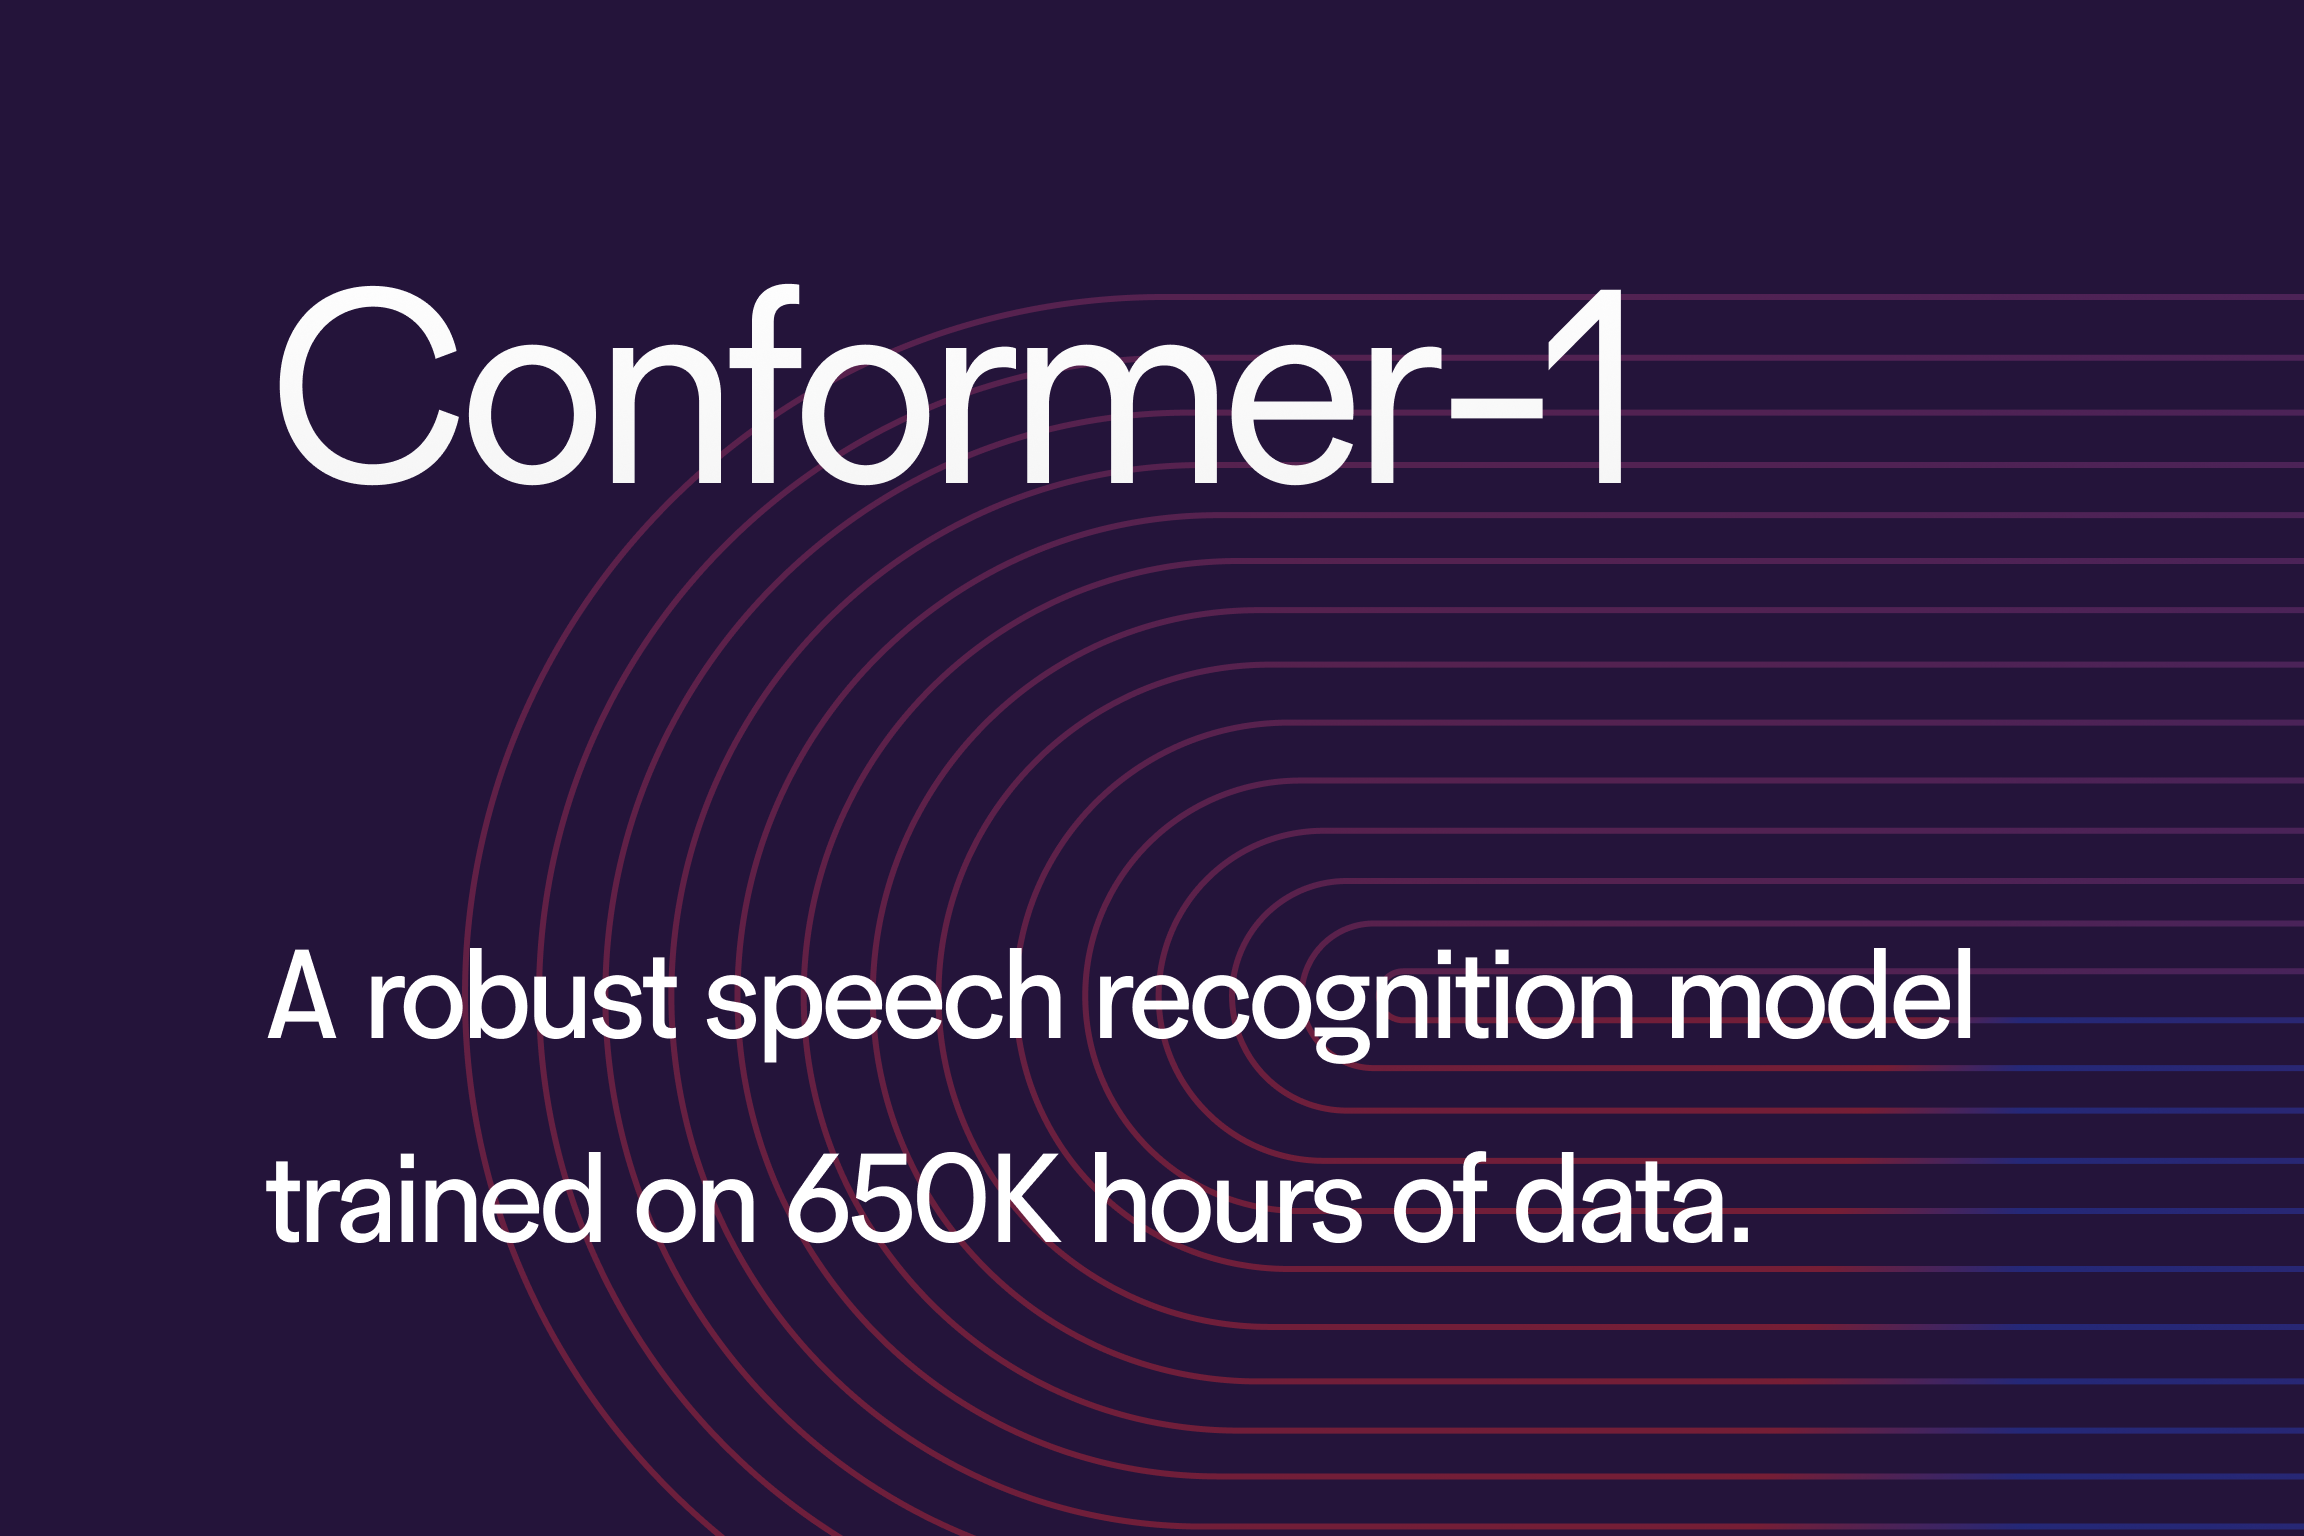 Conformer-1: A robust speech recognition model trained on 650K hours of data